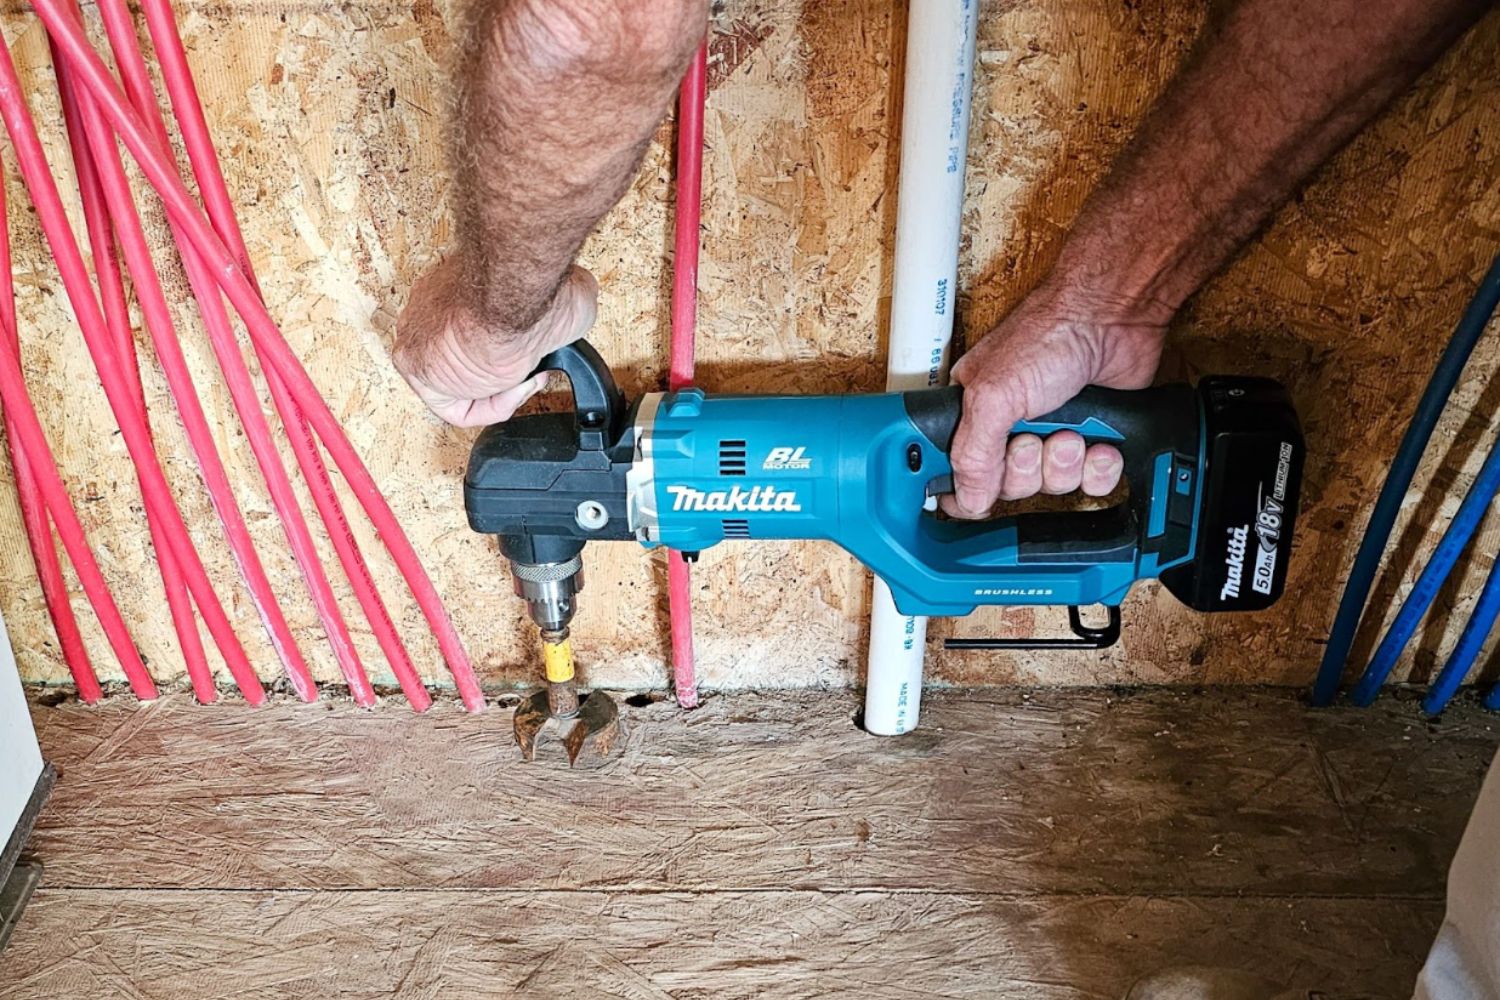 A person using the Makita right-angle drill in a tight space